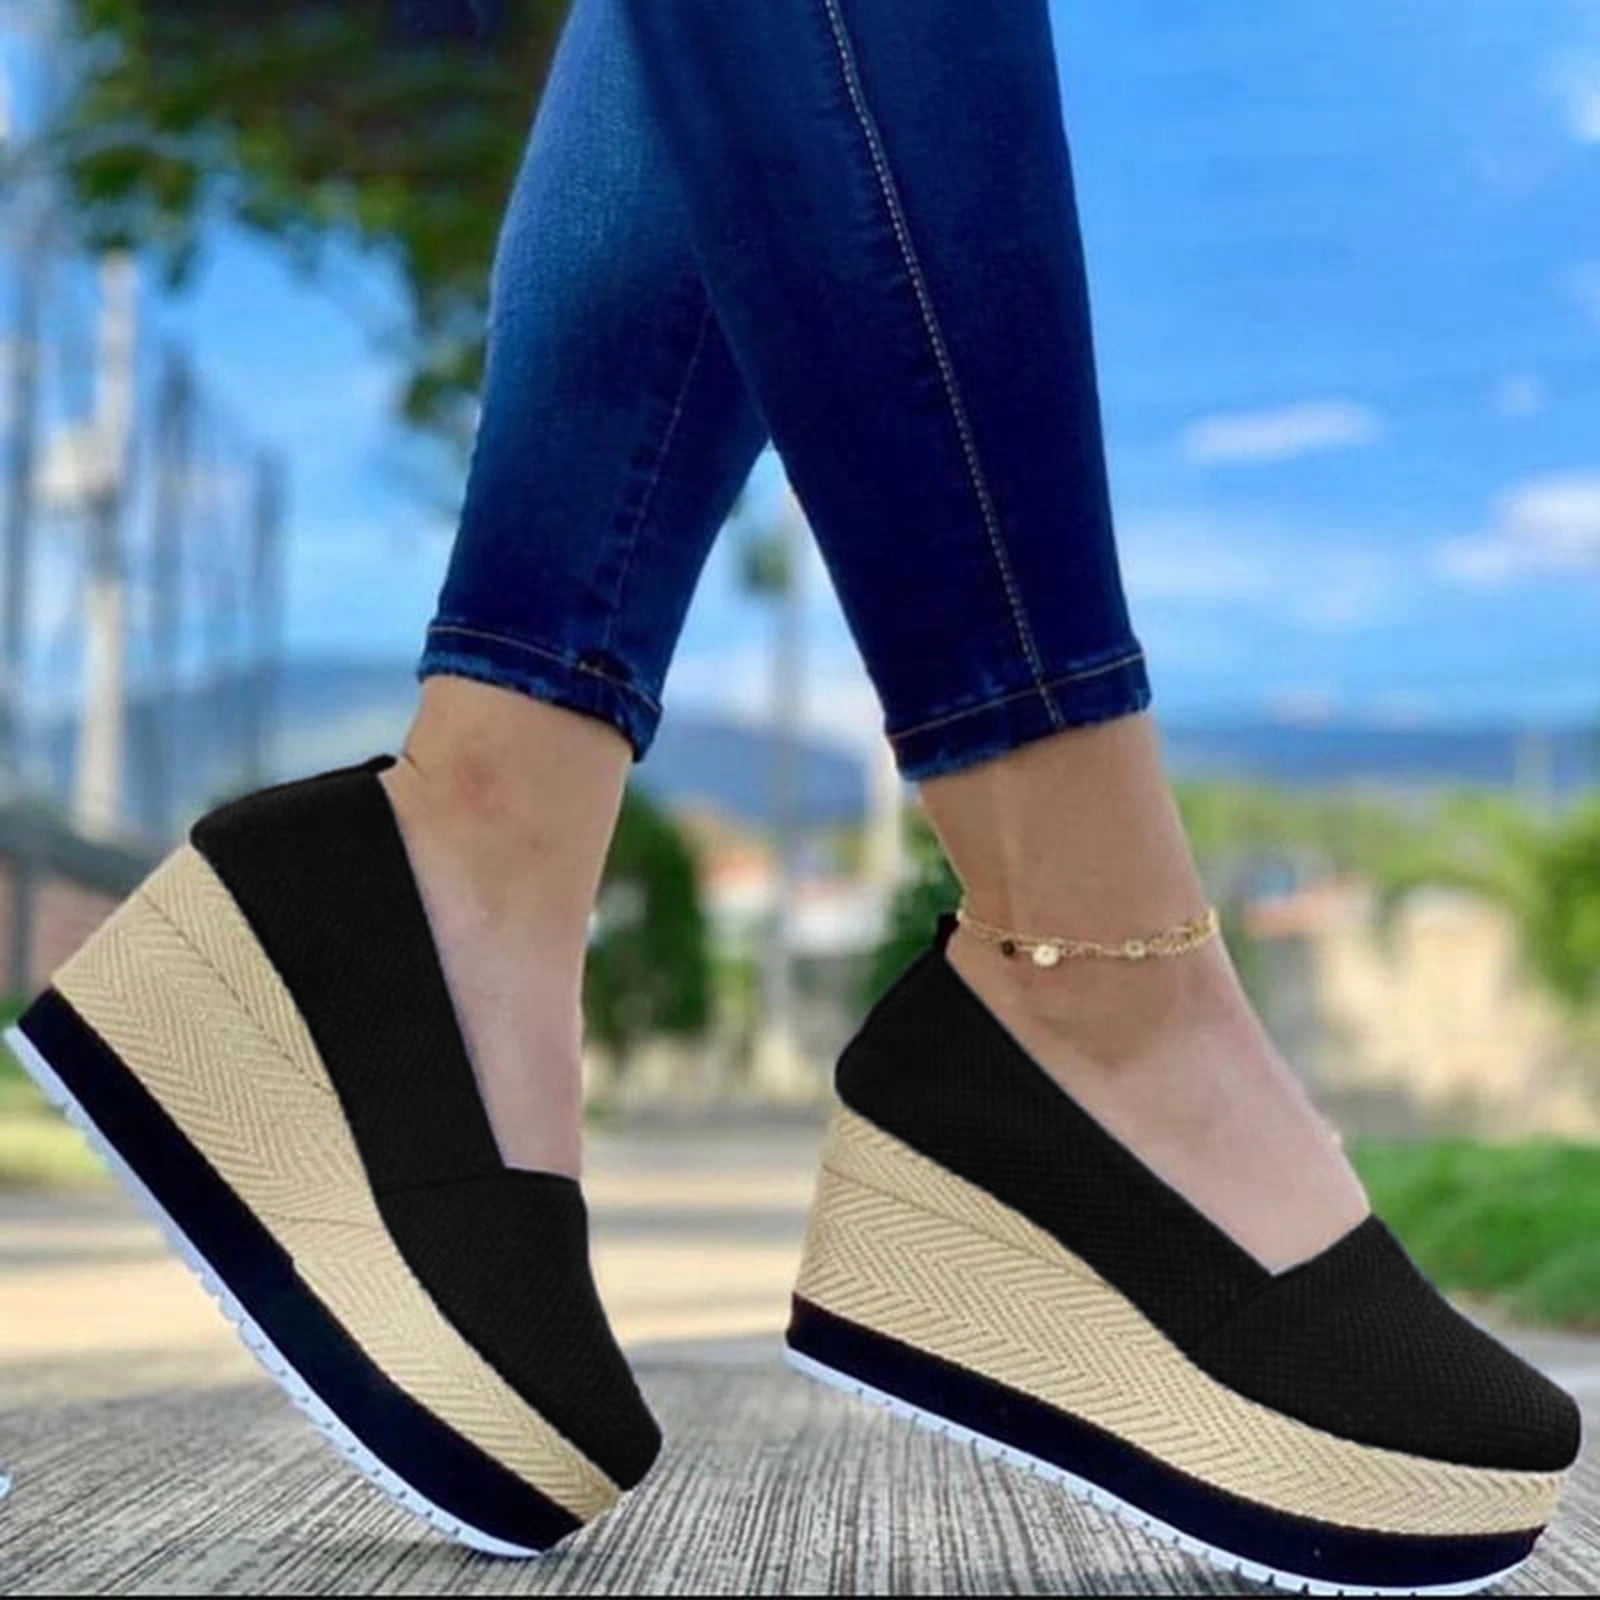 Women's Office Causal Cute Round Toe Wedge Platform  Heel Shoes Size 5-10 NEW 